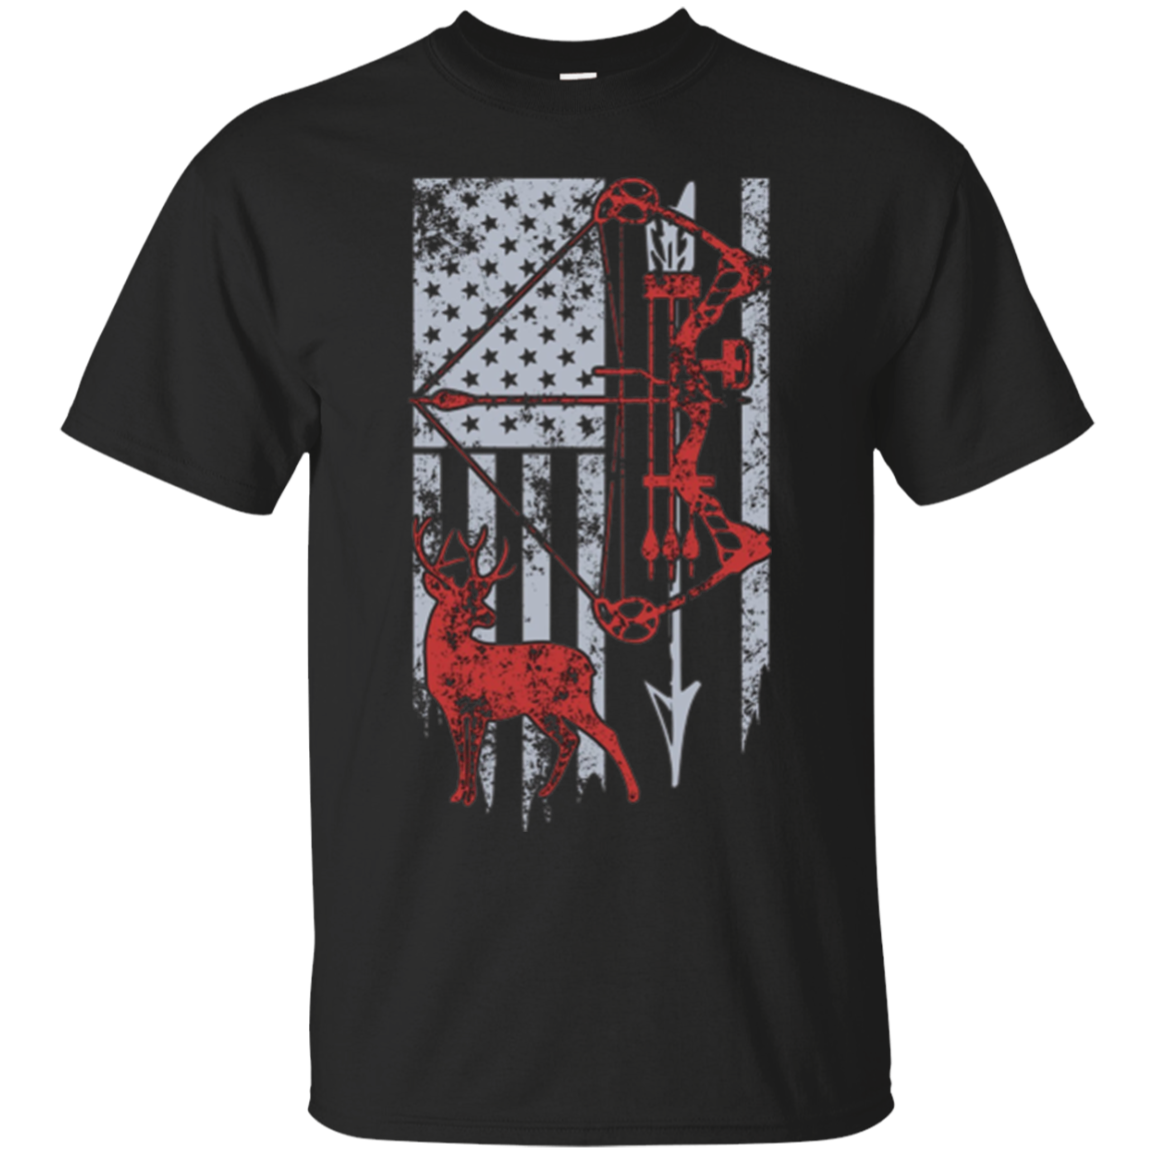 Bow Hunting Deer Flag T-shirt For Or Hunters